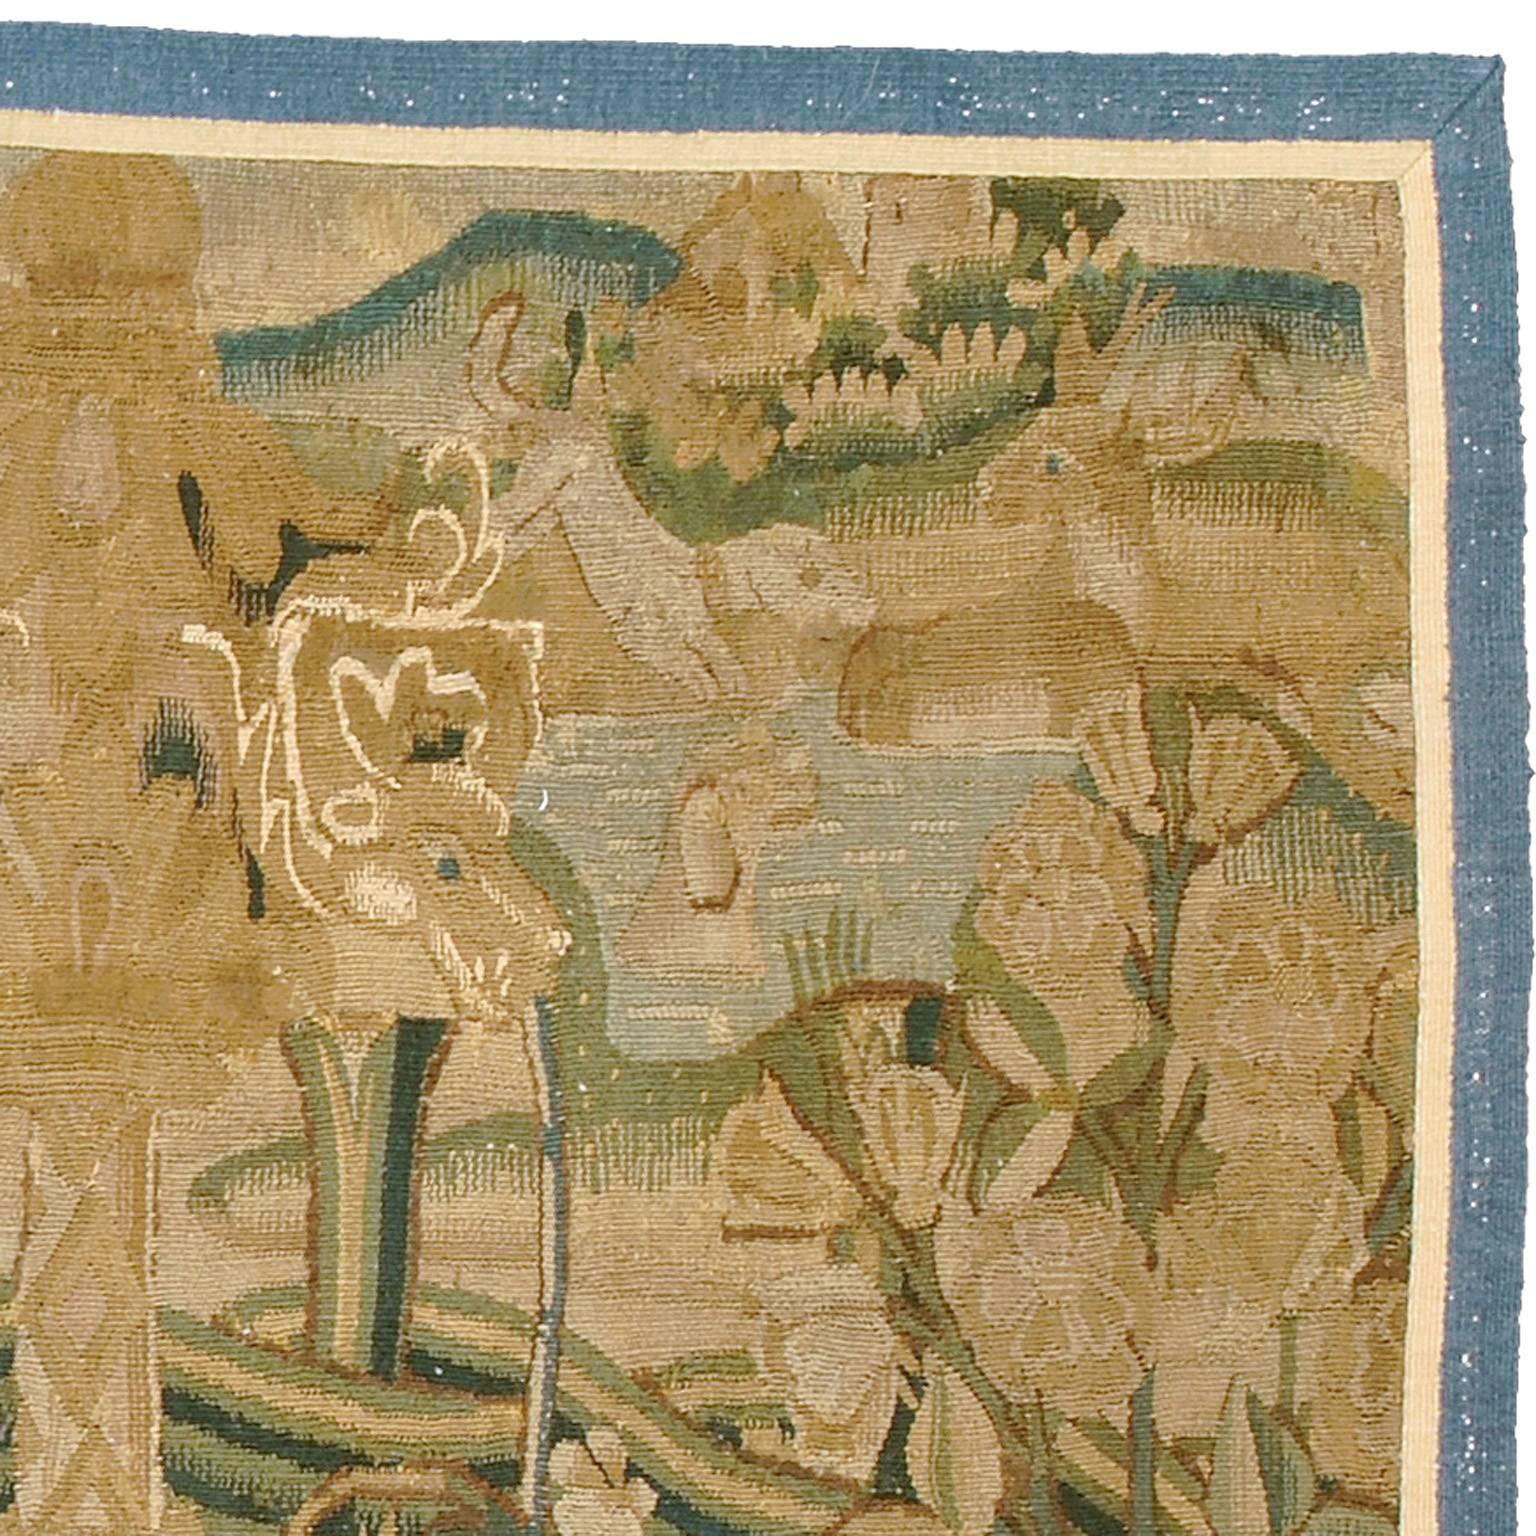 Early 16th century flemish late Gothic tapestry, possibly tournai.
Provenance: Dinolevi, Florence, circa 1960.